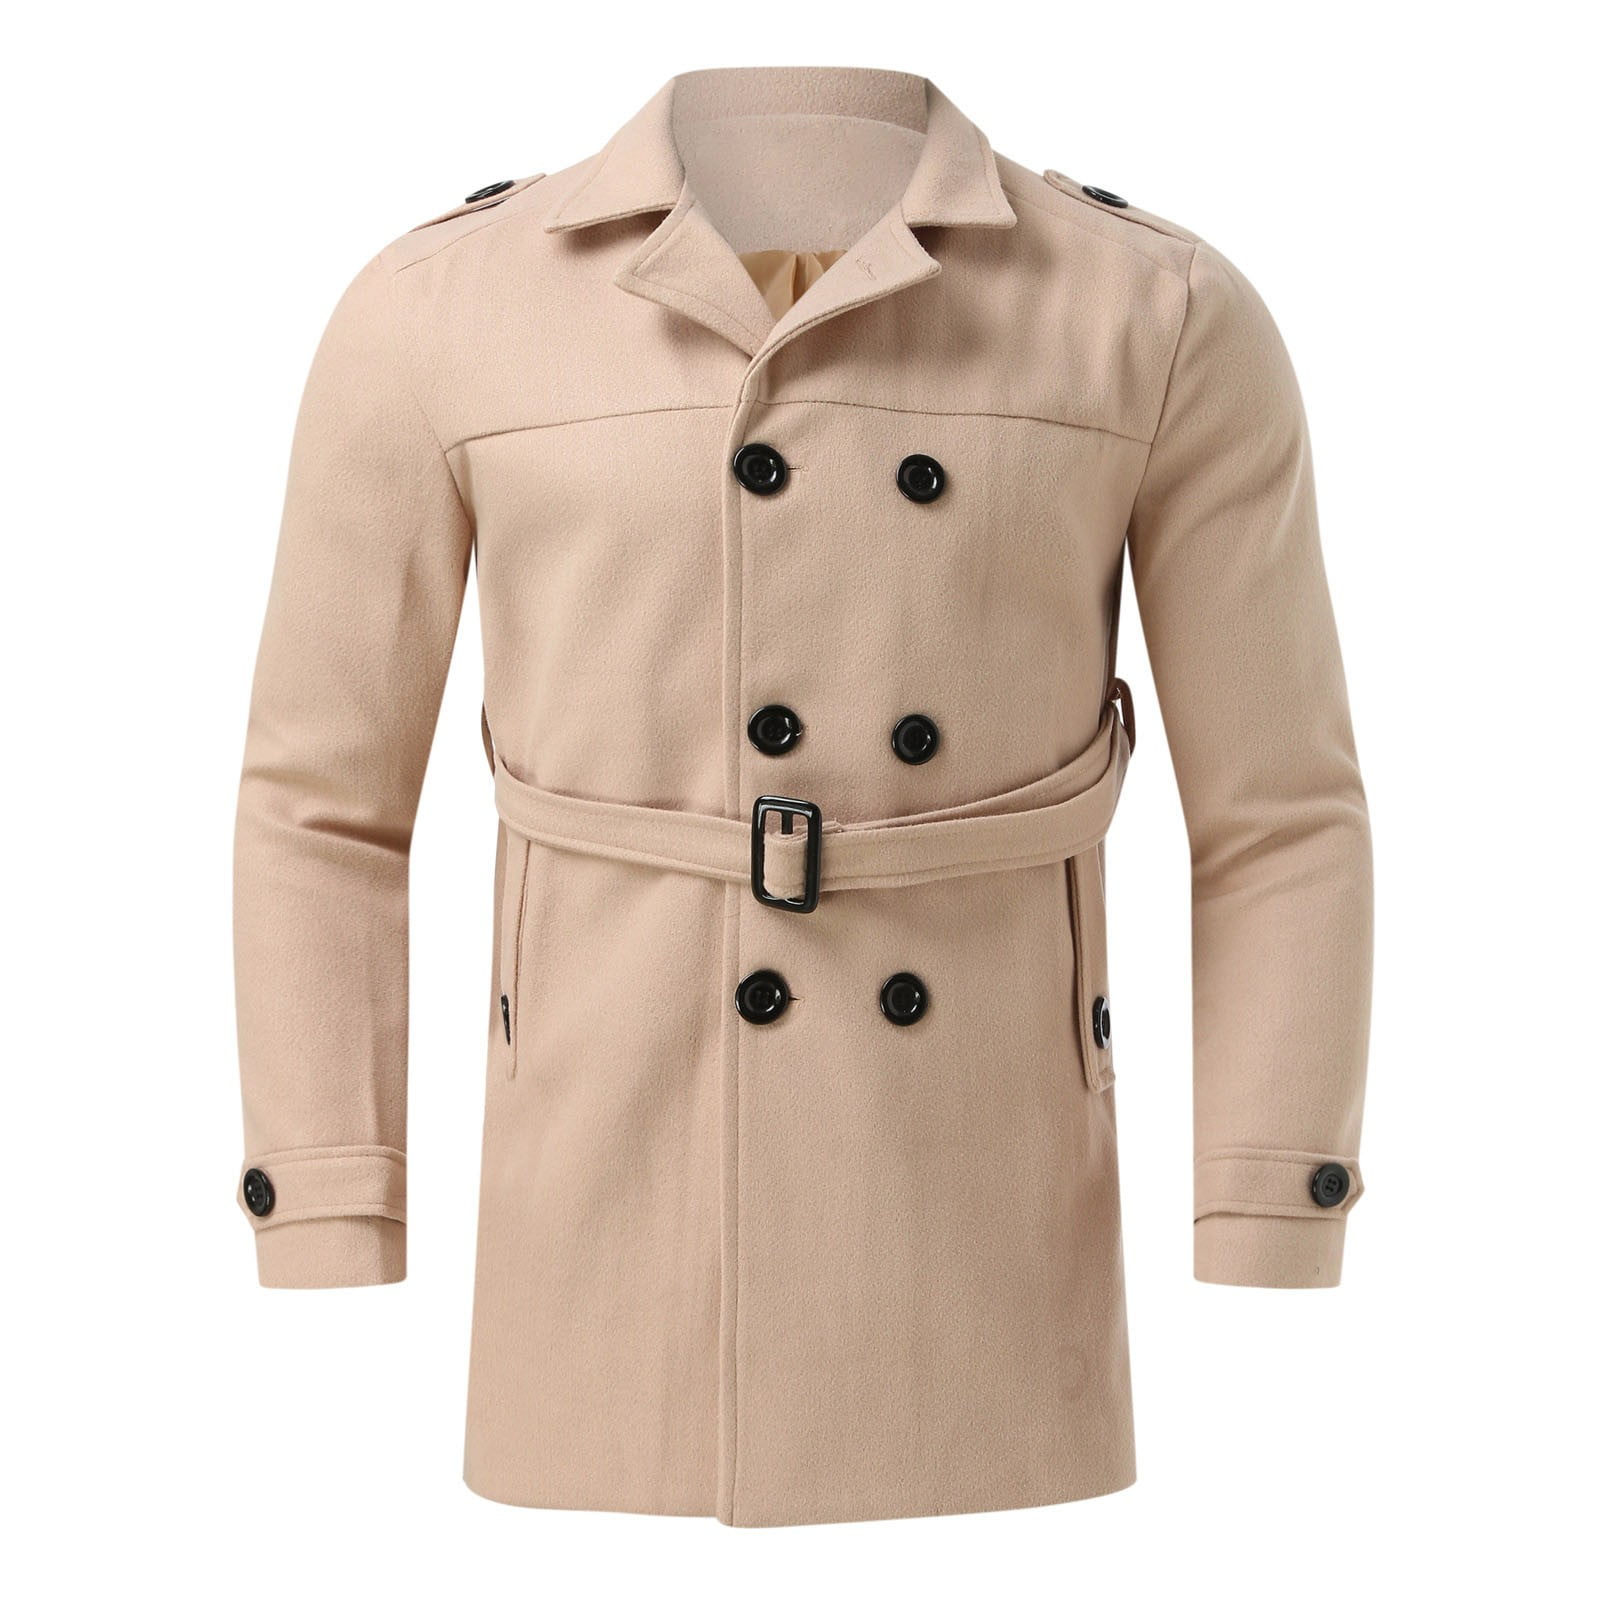 Yubnlvae Male Autumn And Winter Trench Coat Double Striped Button Lapel  Pocket Large Size Long Sleeve Woolen Coat Jacket